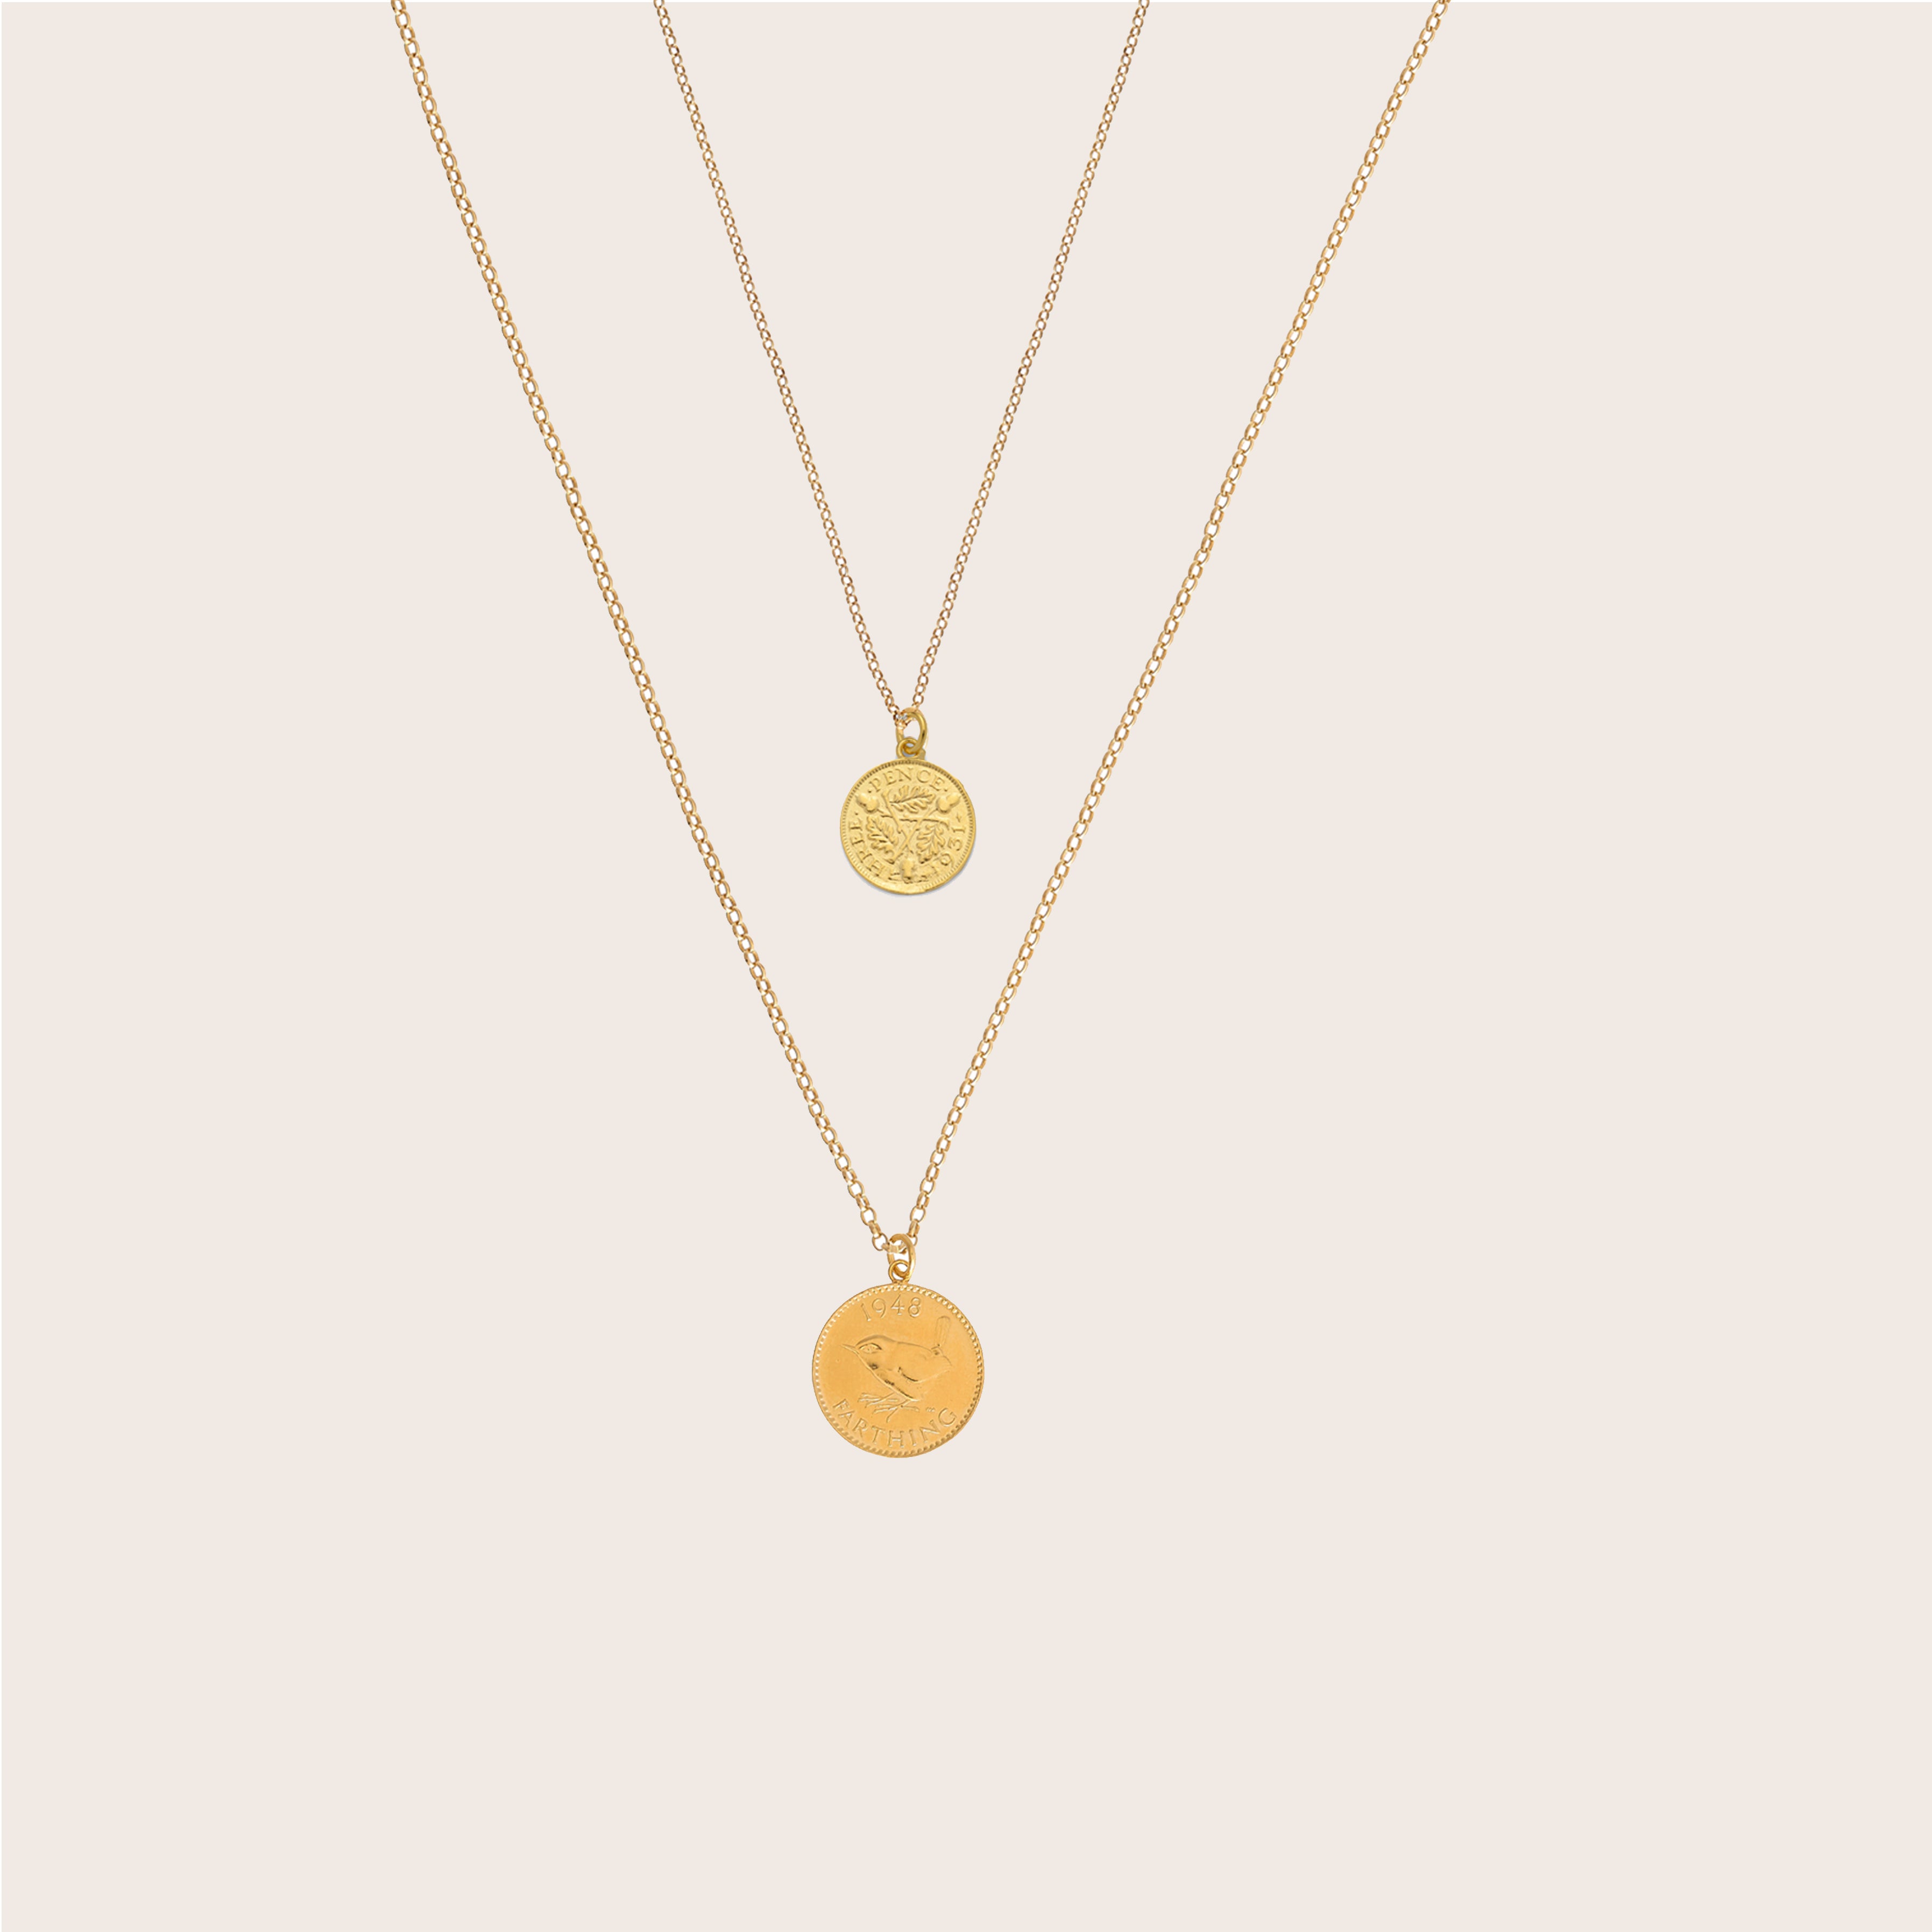 Double Gold Coin Necklace - harryrockslondon